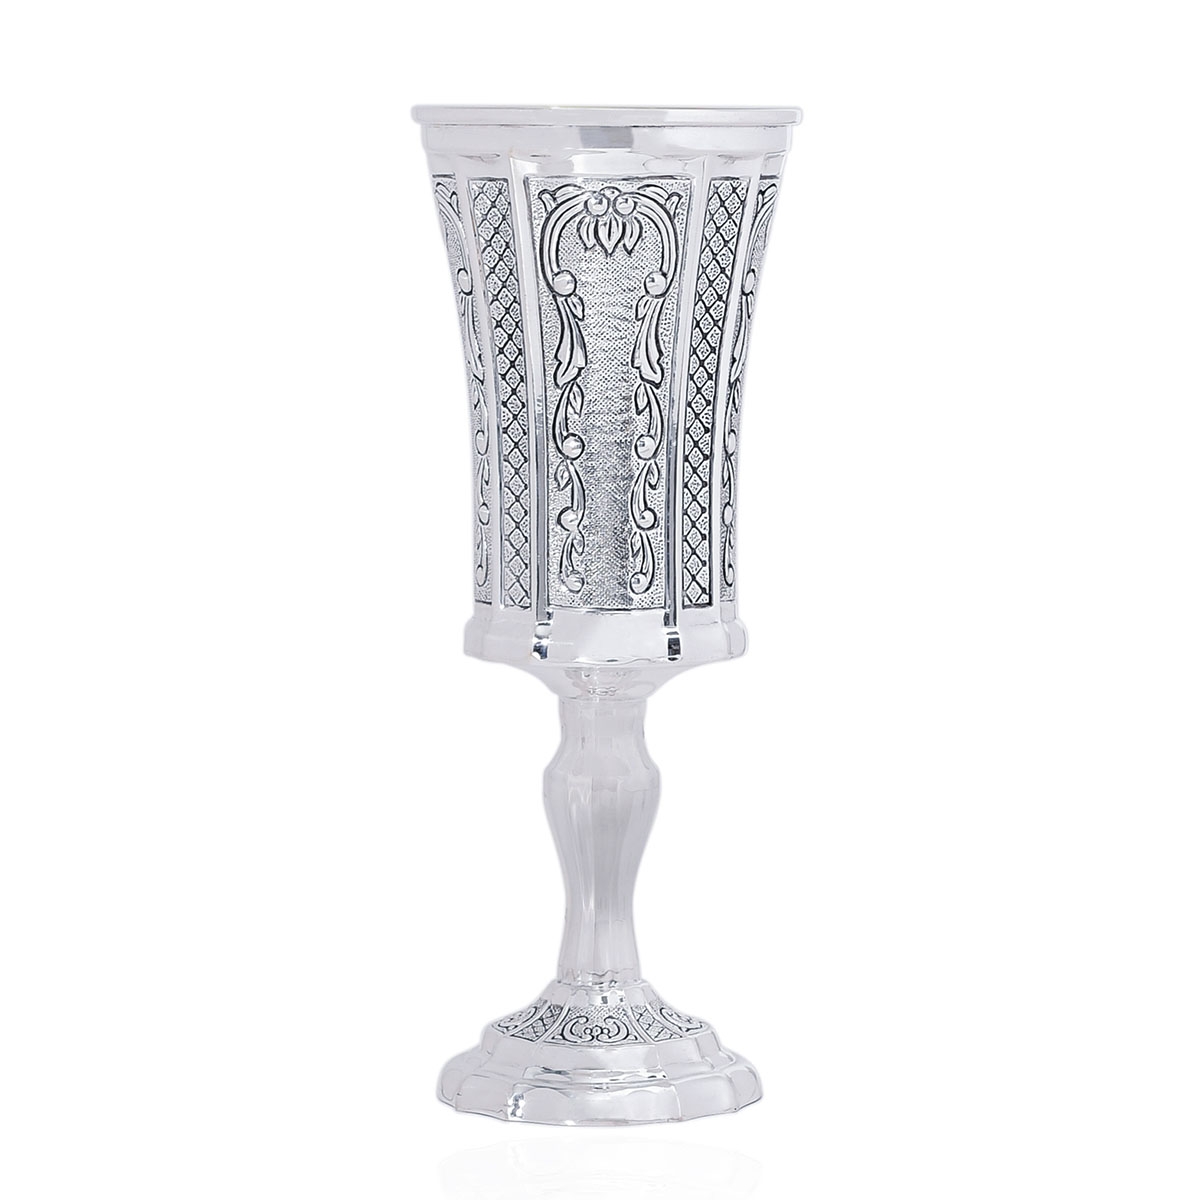 Deluxe 925 Sterling Silver Stemmed Kiddush Cup With Ornate Design - 1